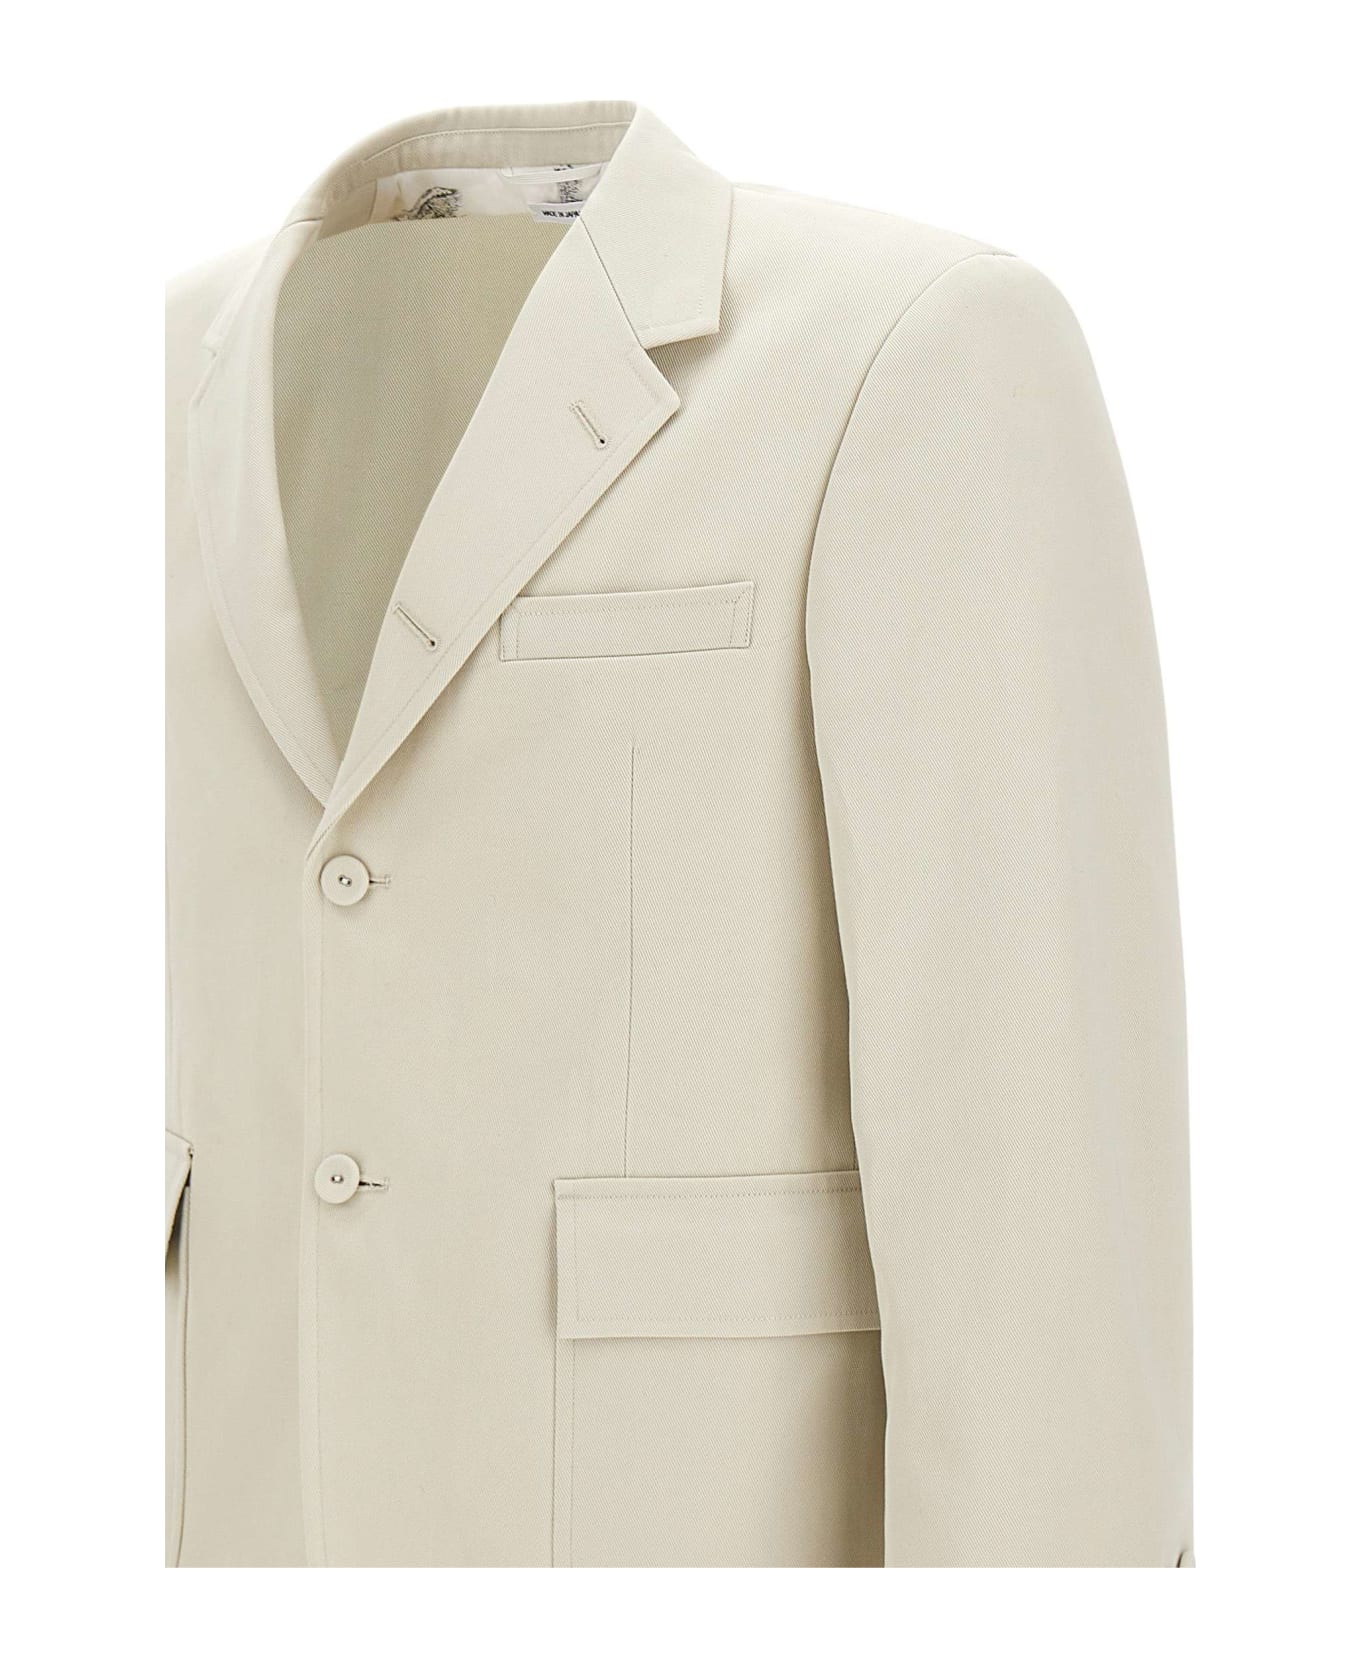 Thom Browne 'unconstructed Straight Fit' Cotton Blazer - WHITE